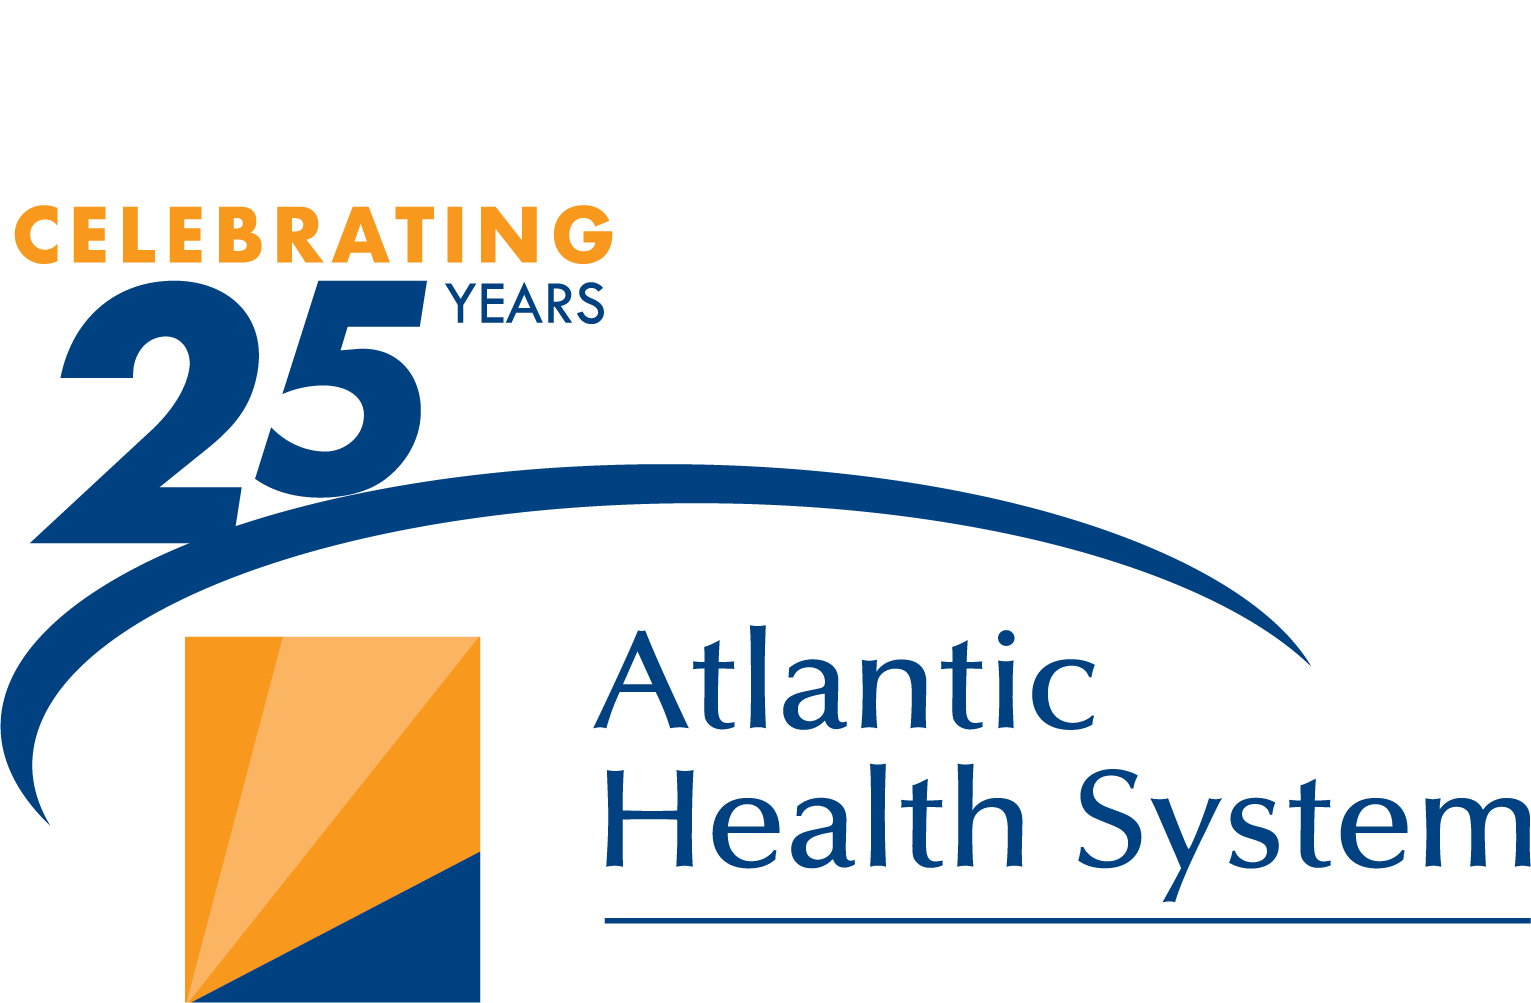 Atlantic Health System Takes Consumer Convenience to the Next Level with Online Scheduling from Kyruus